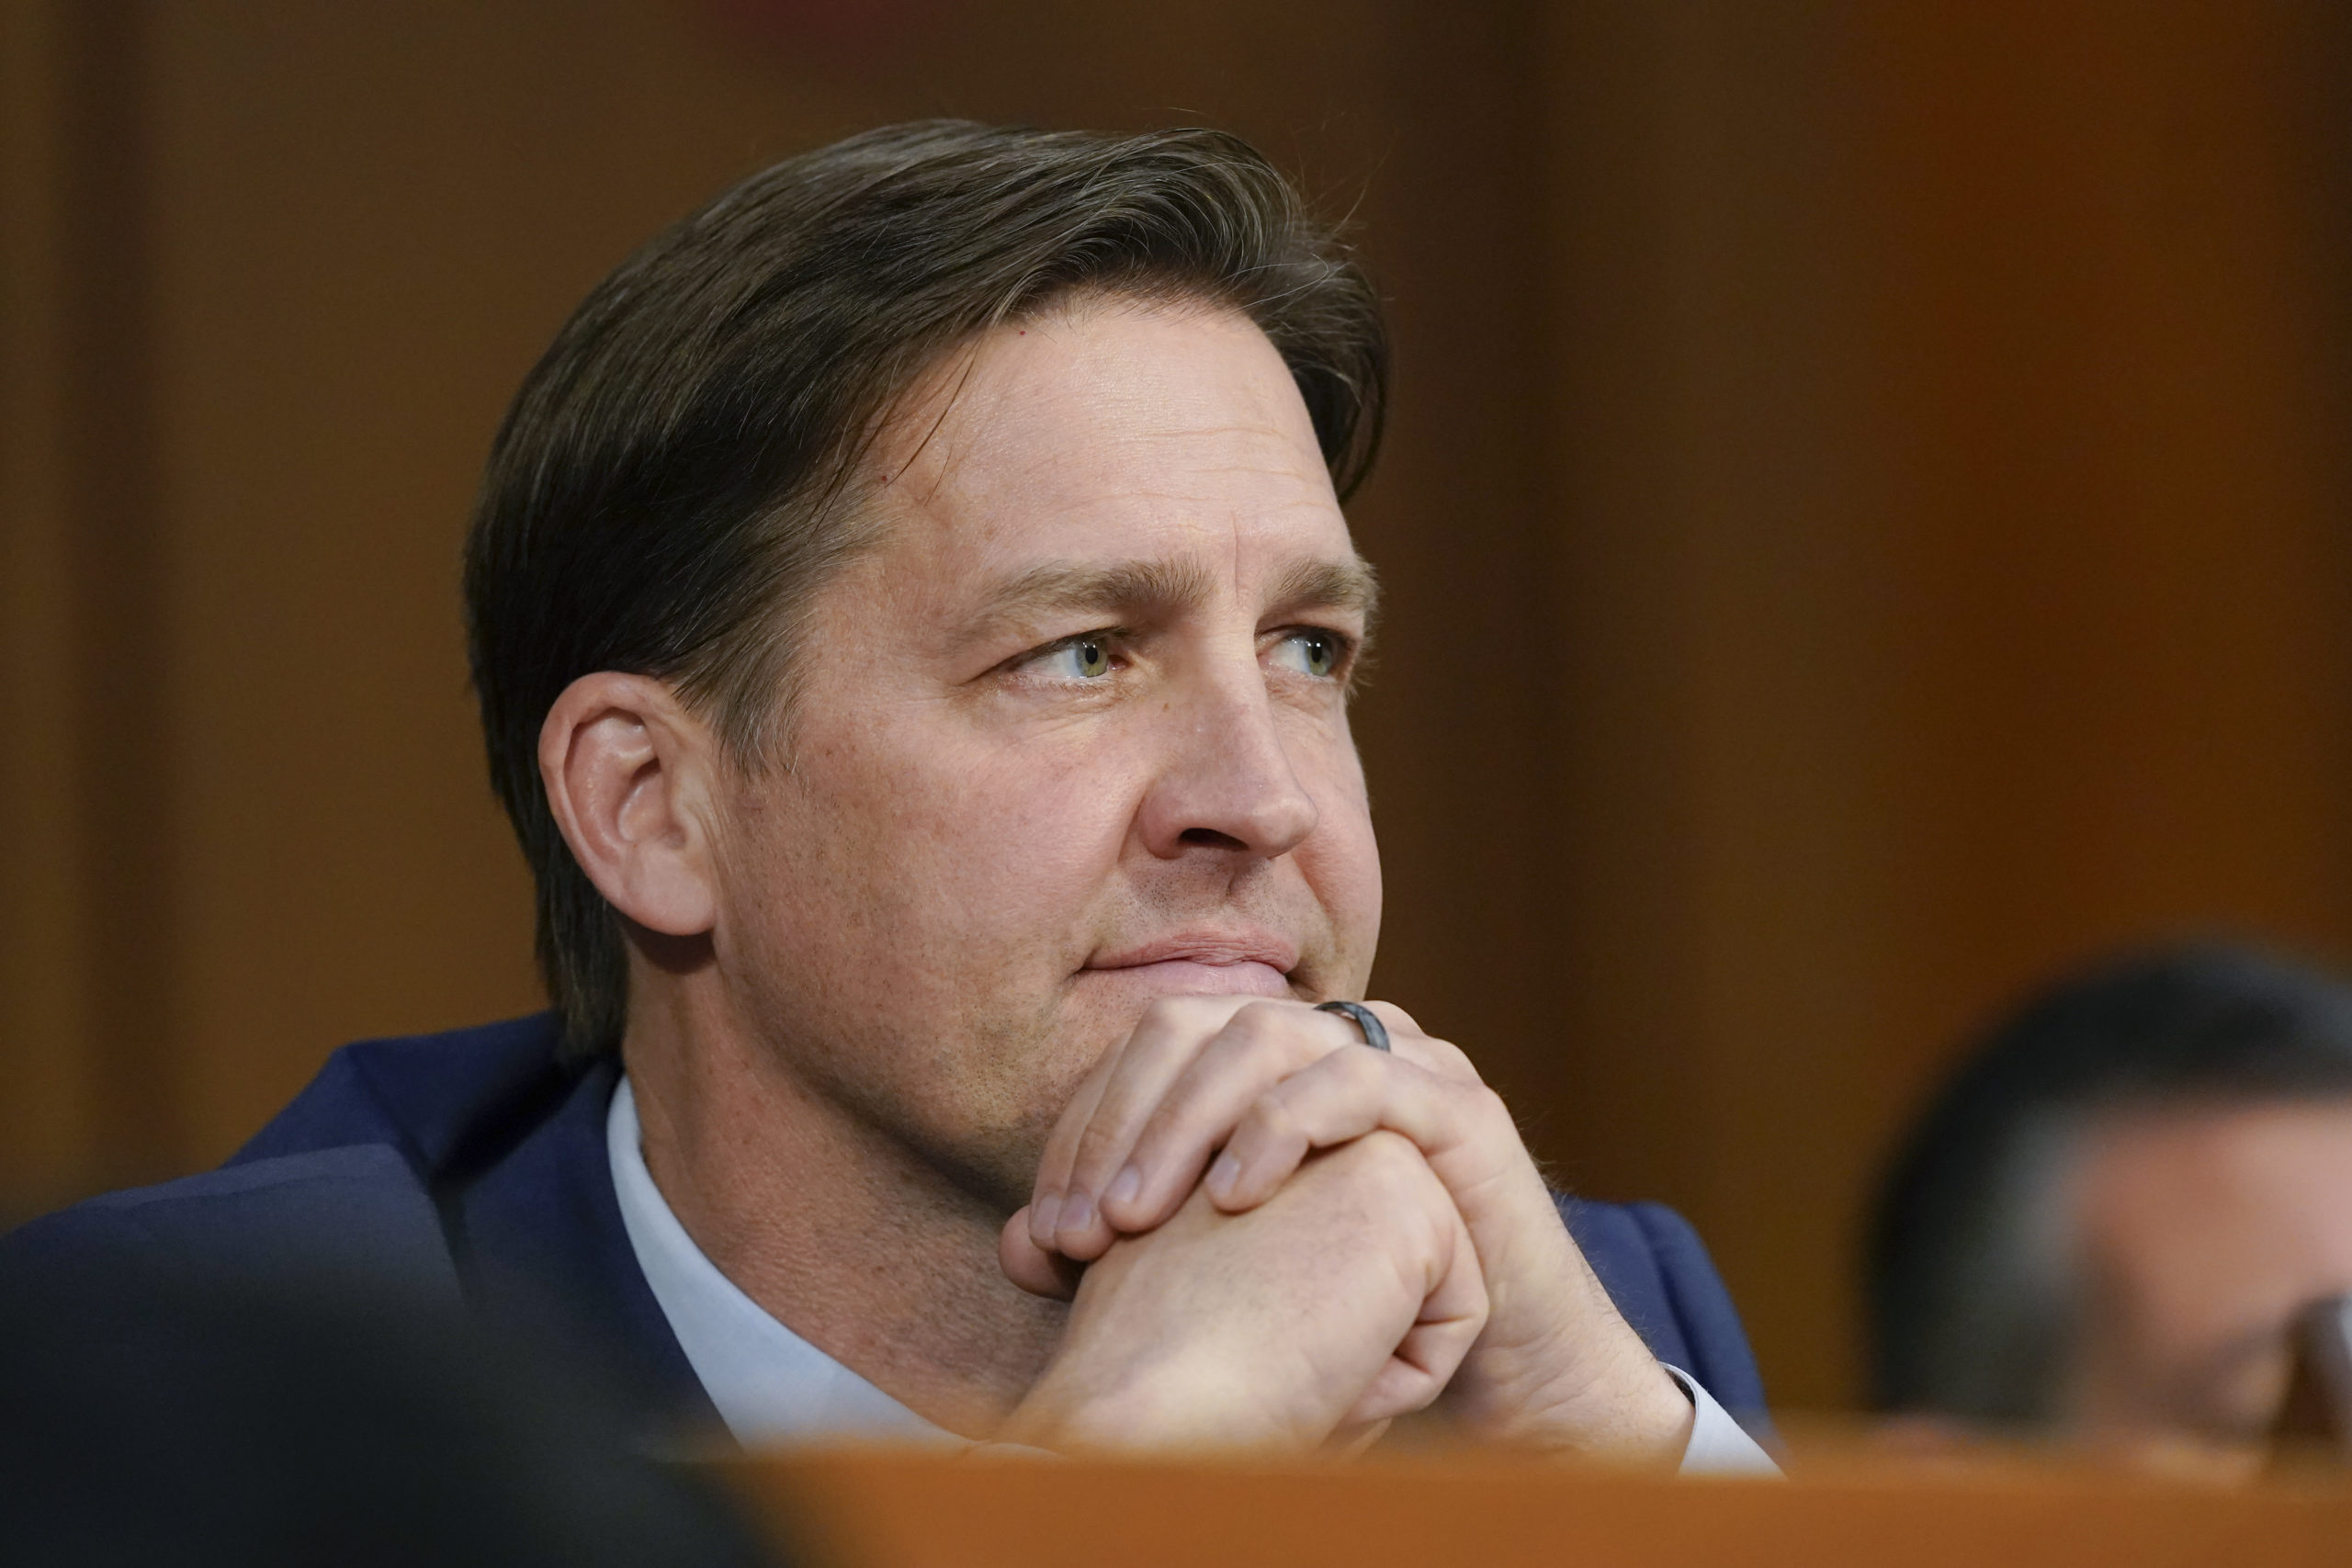 Sen. Ben Sasse, R-Neb., listens during a confirmation hearing for Supreme Court nominee Ketanji Brown Jackson before the Senate Judiciary Committee on Capitol Hill on March 23.